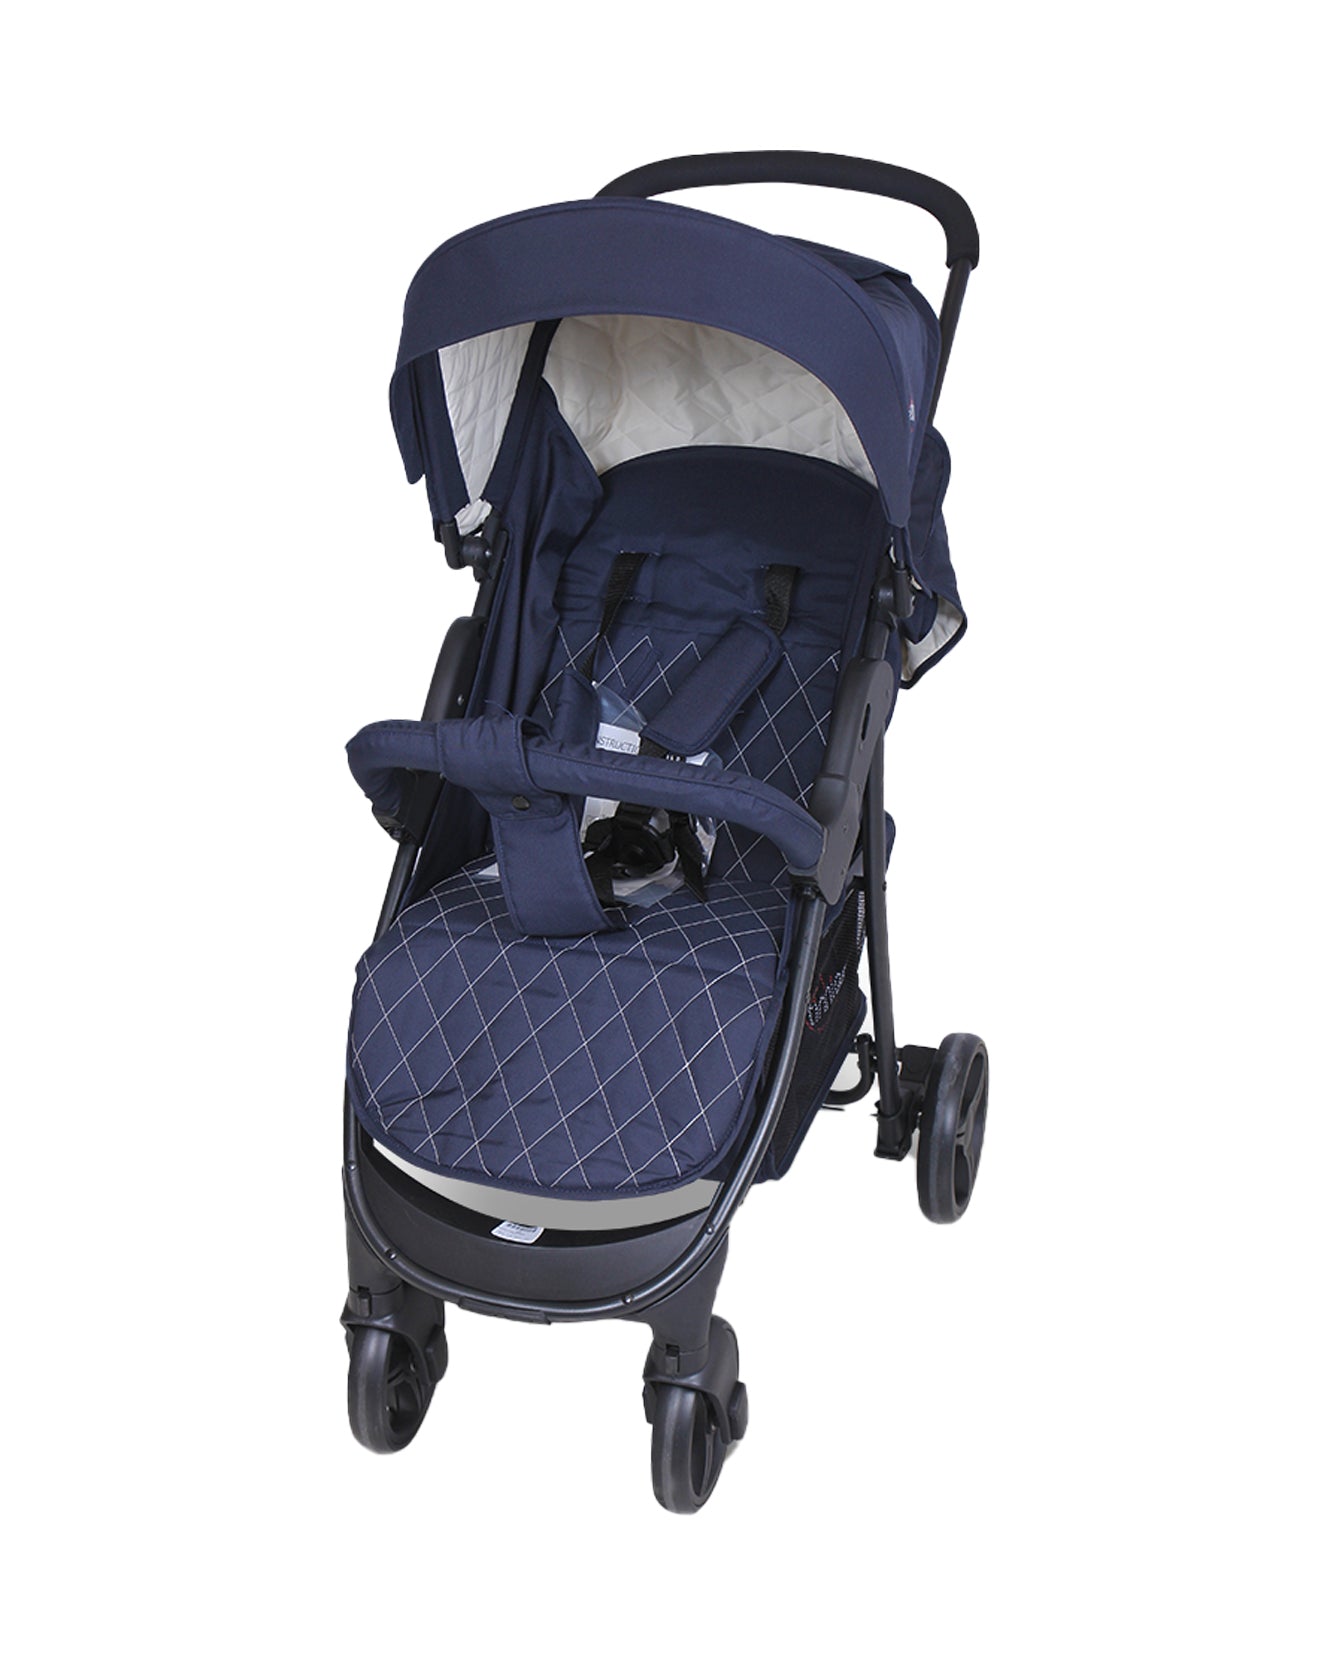 Tinnies Baby Stroller (Multi Color)